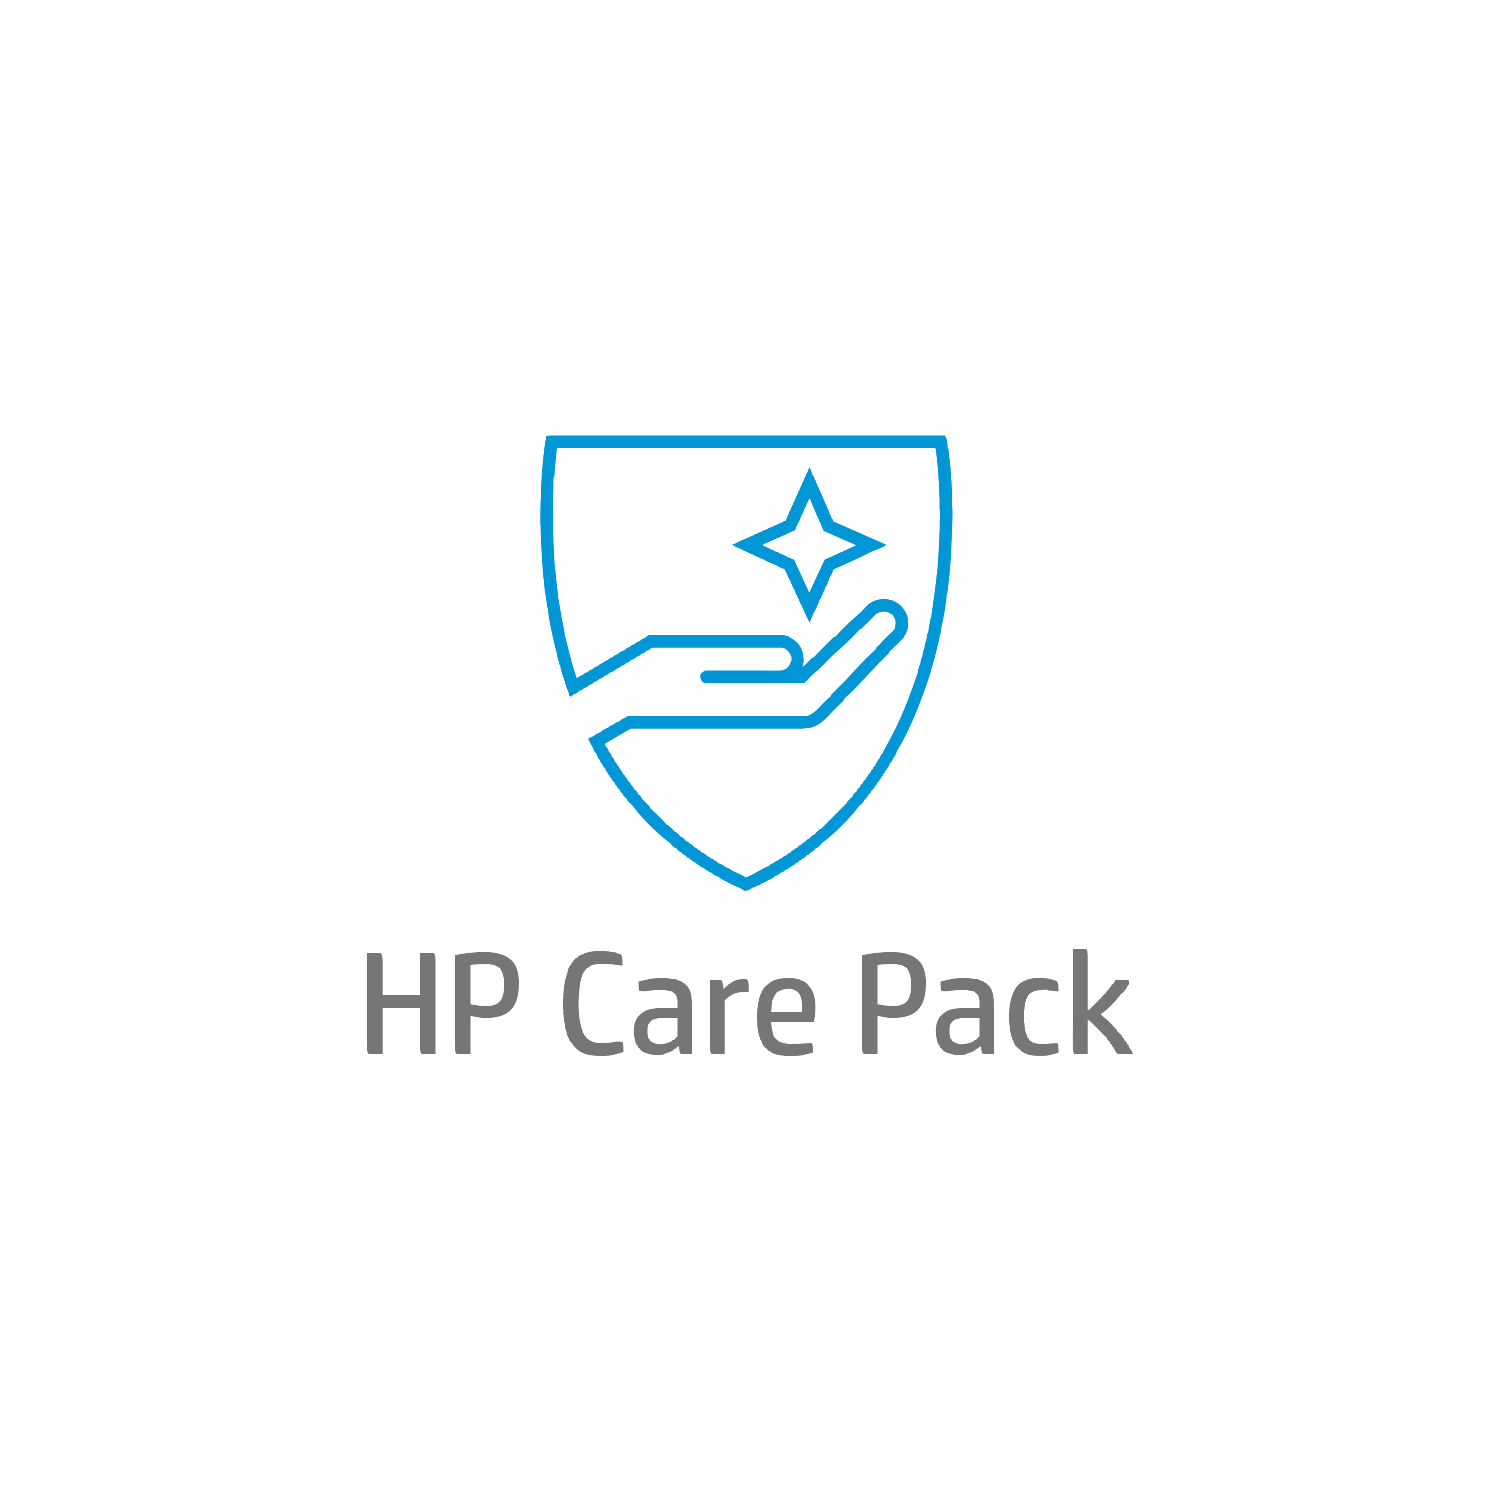 Bild von HP 1y 9x5 HPOutput Central 500-999Lic SW Support REQUIRED for each software license purchased. - Remote software assistance - Remote - In warranty - Standard workdays - 9 hours - 1 year - Next available agent